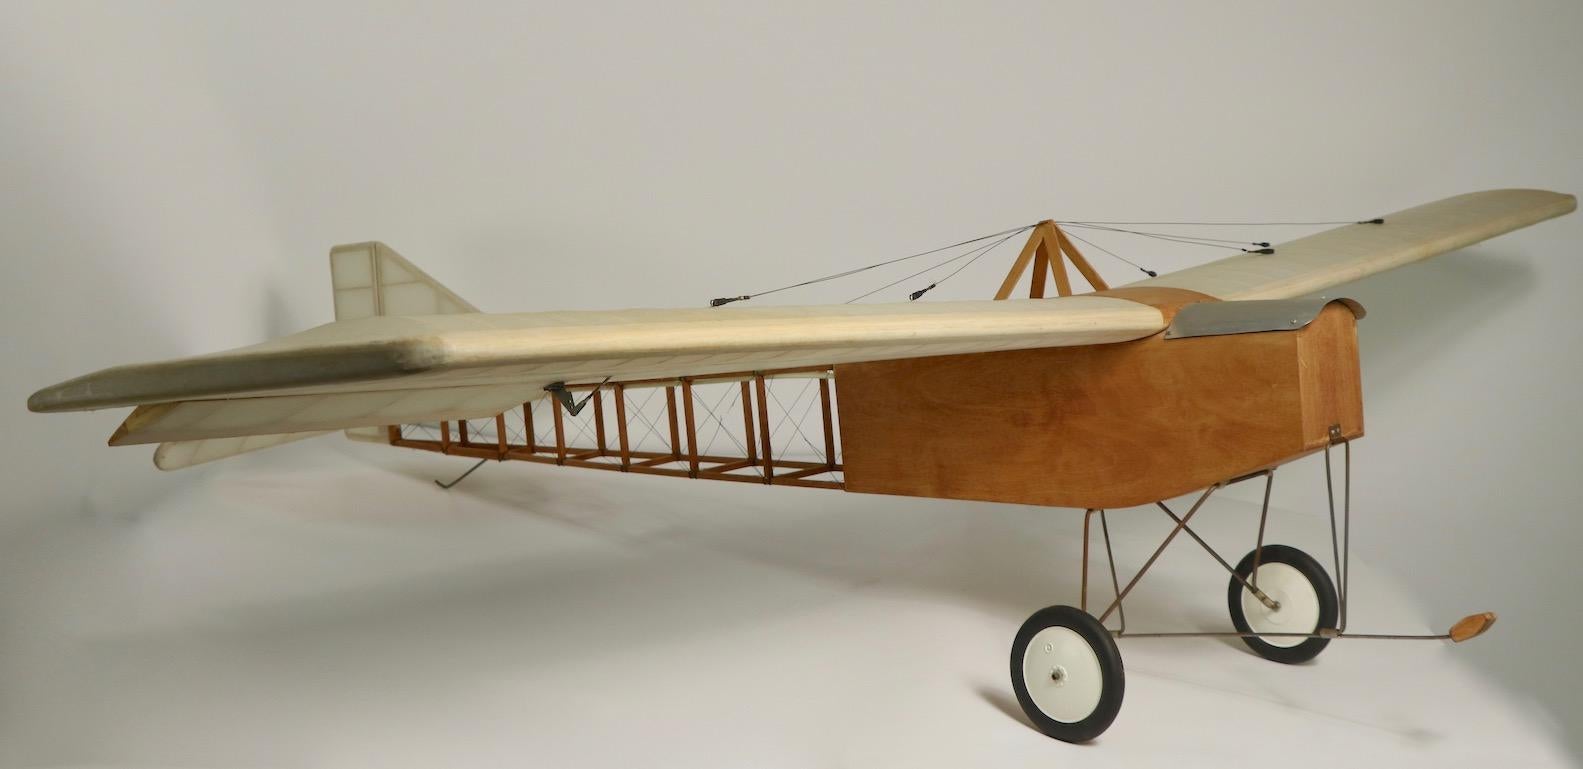 Deconstructed Architectural Model of an Airplane 6